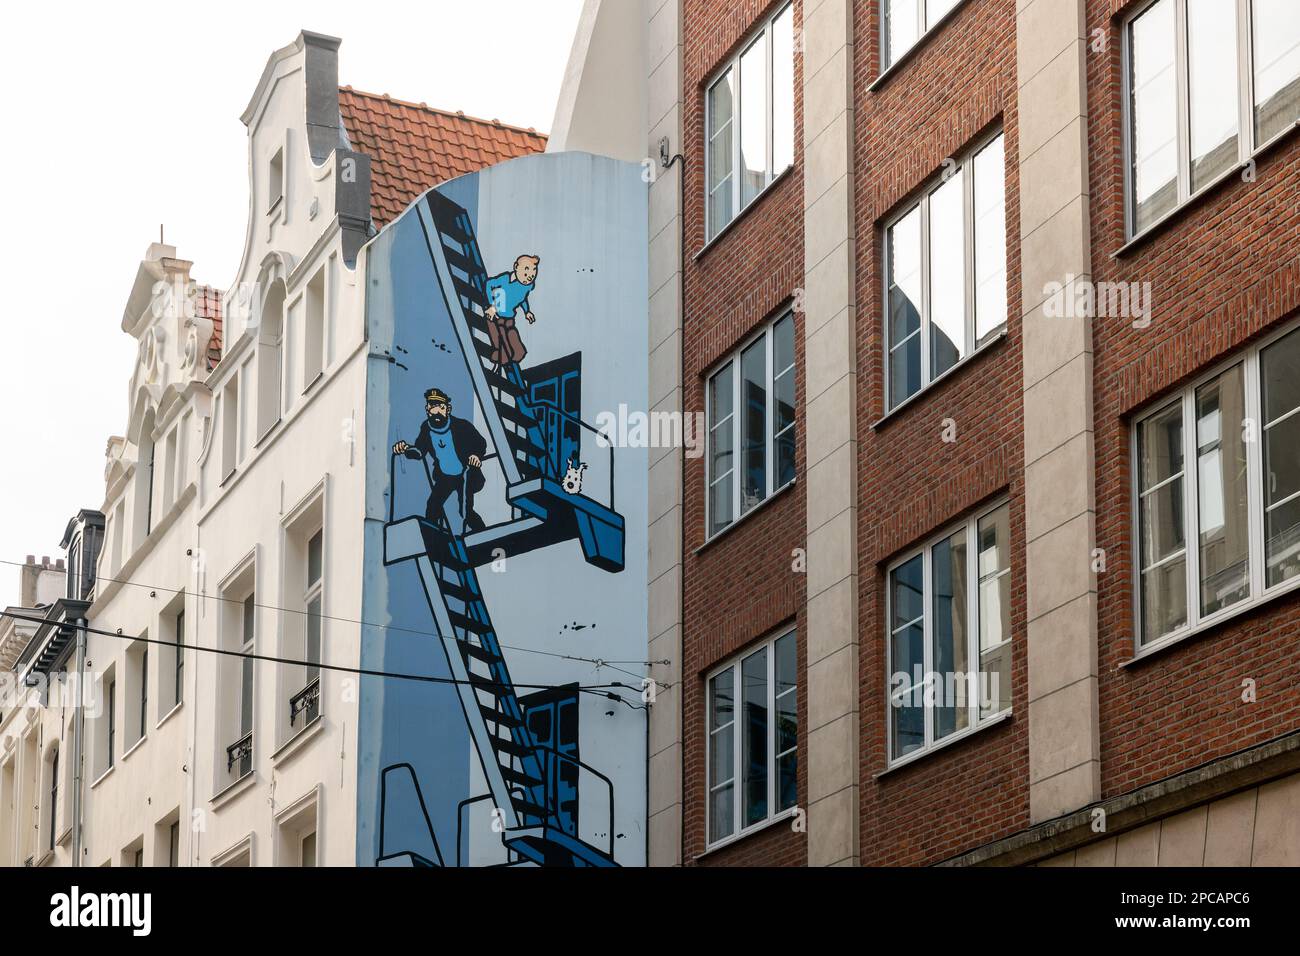 Famous mural of TinTin, captain Haddock and Snowy descending stairs as a wall mural in Brussels opposite the mannequin pis. Stock Photo